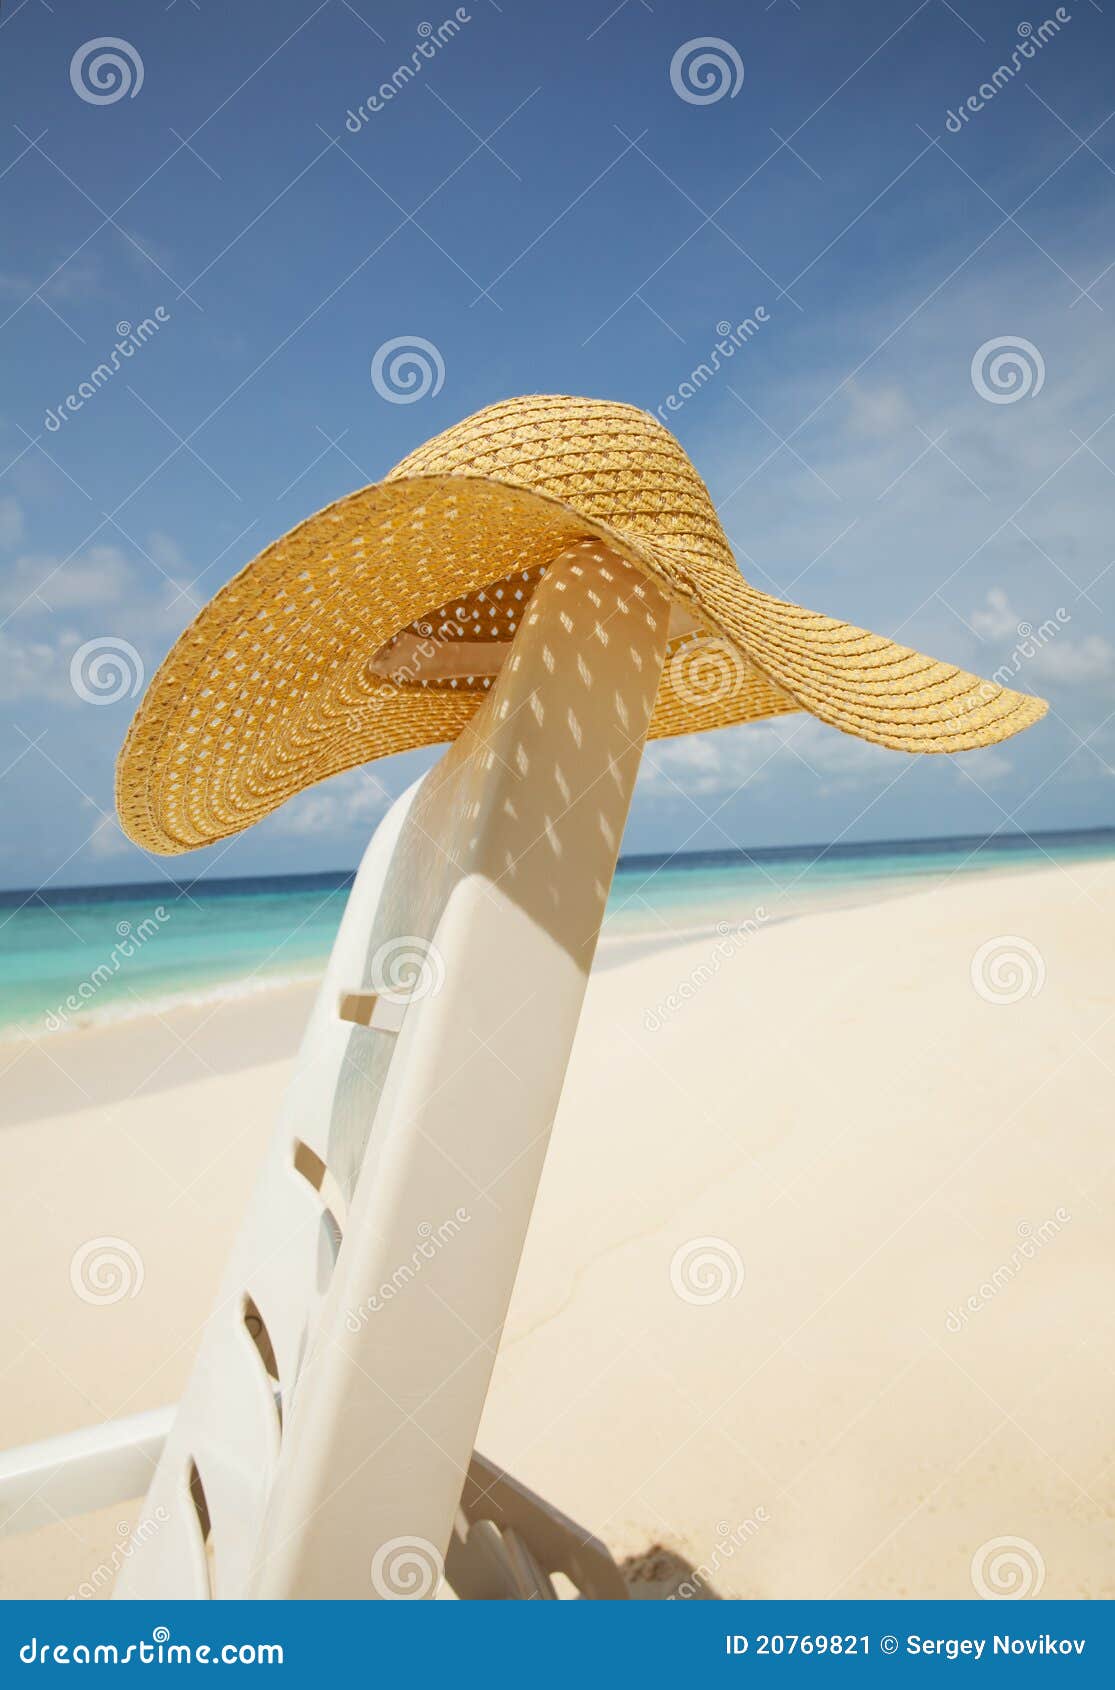 Summer relaxation stock image. Image of island, brown - 20769821